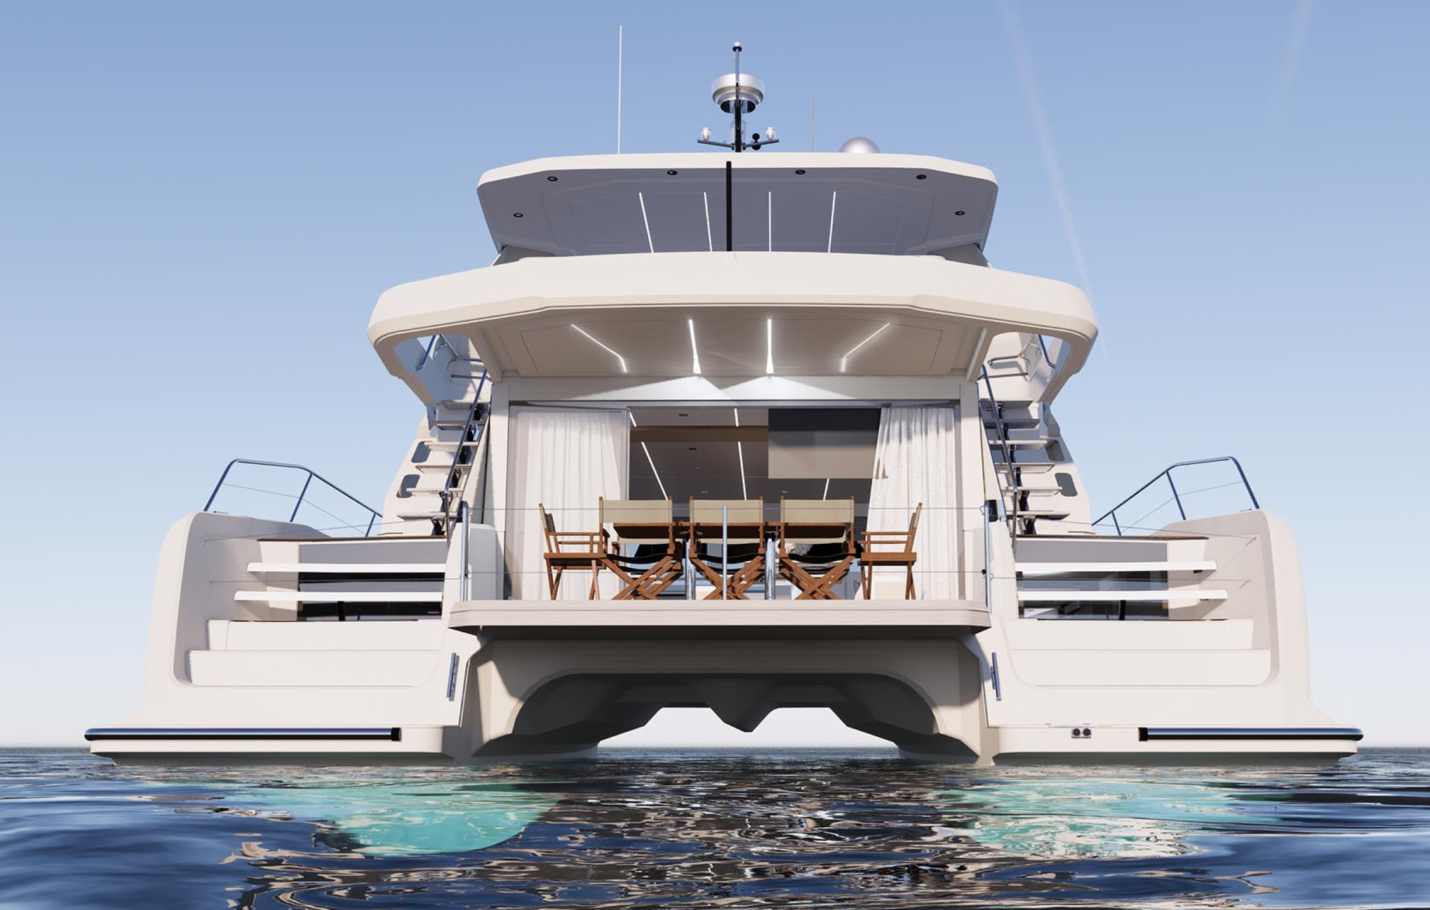 The Omaya 50 has an 8.4 m beam, providing impressive social zones and accommodations as well as the promise of stability much greater than monohulls of similar LOA.